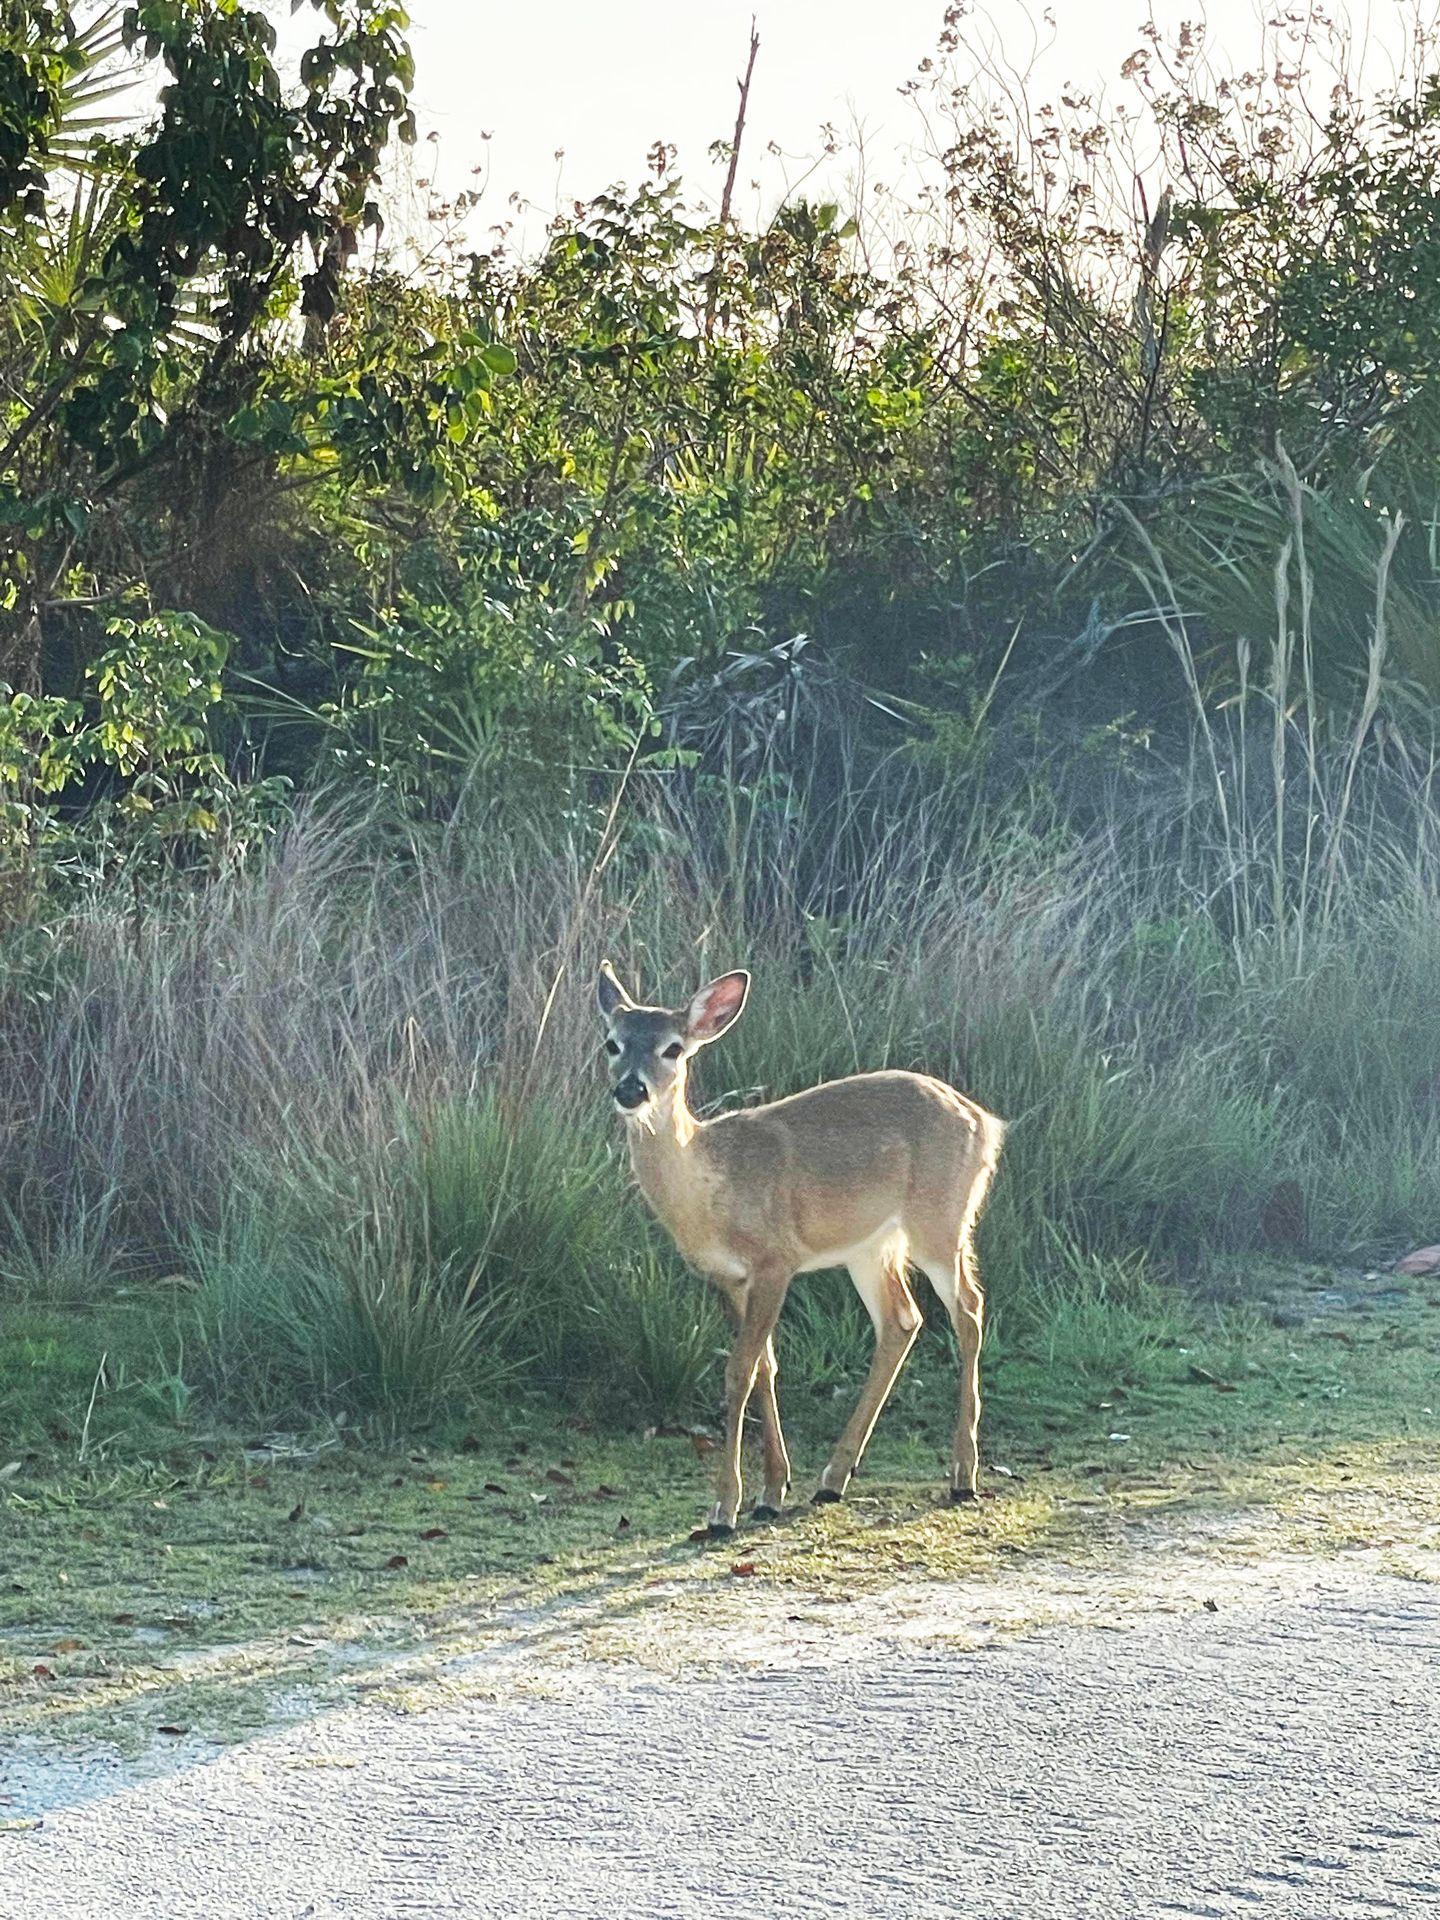 A miniature deer in front of some greenery